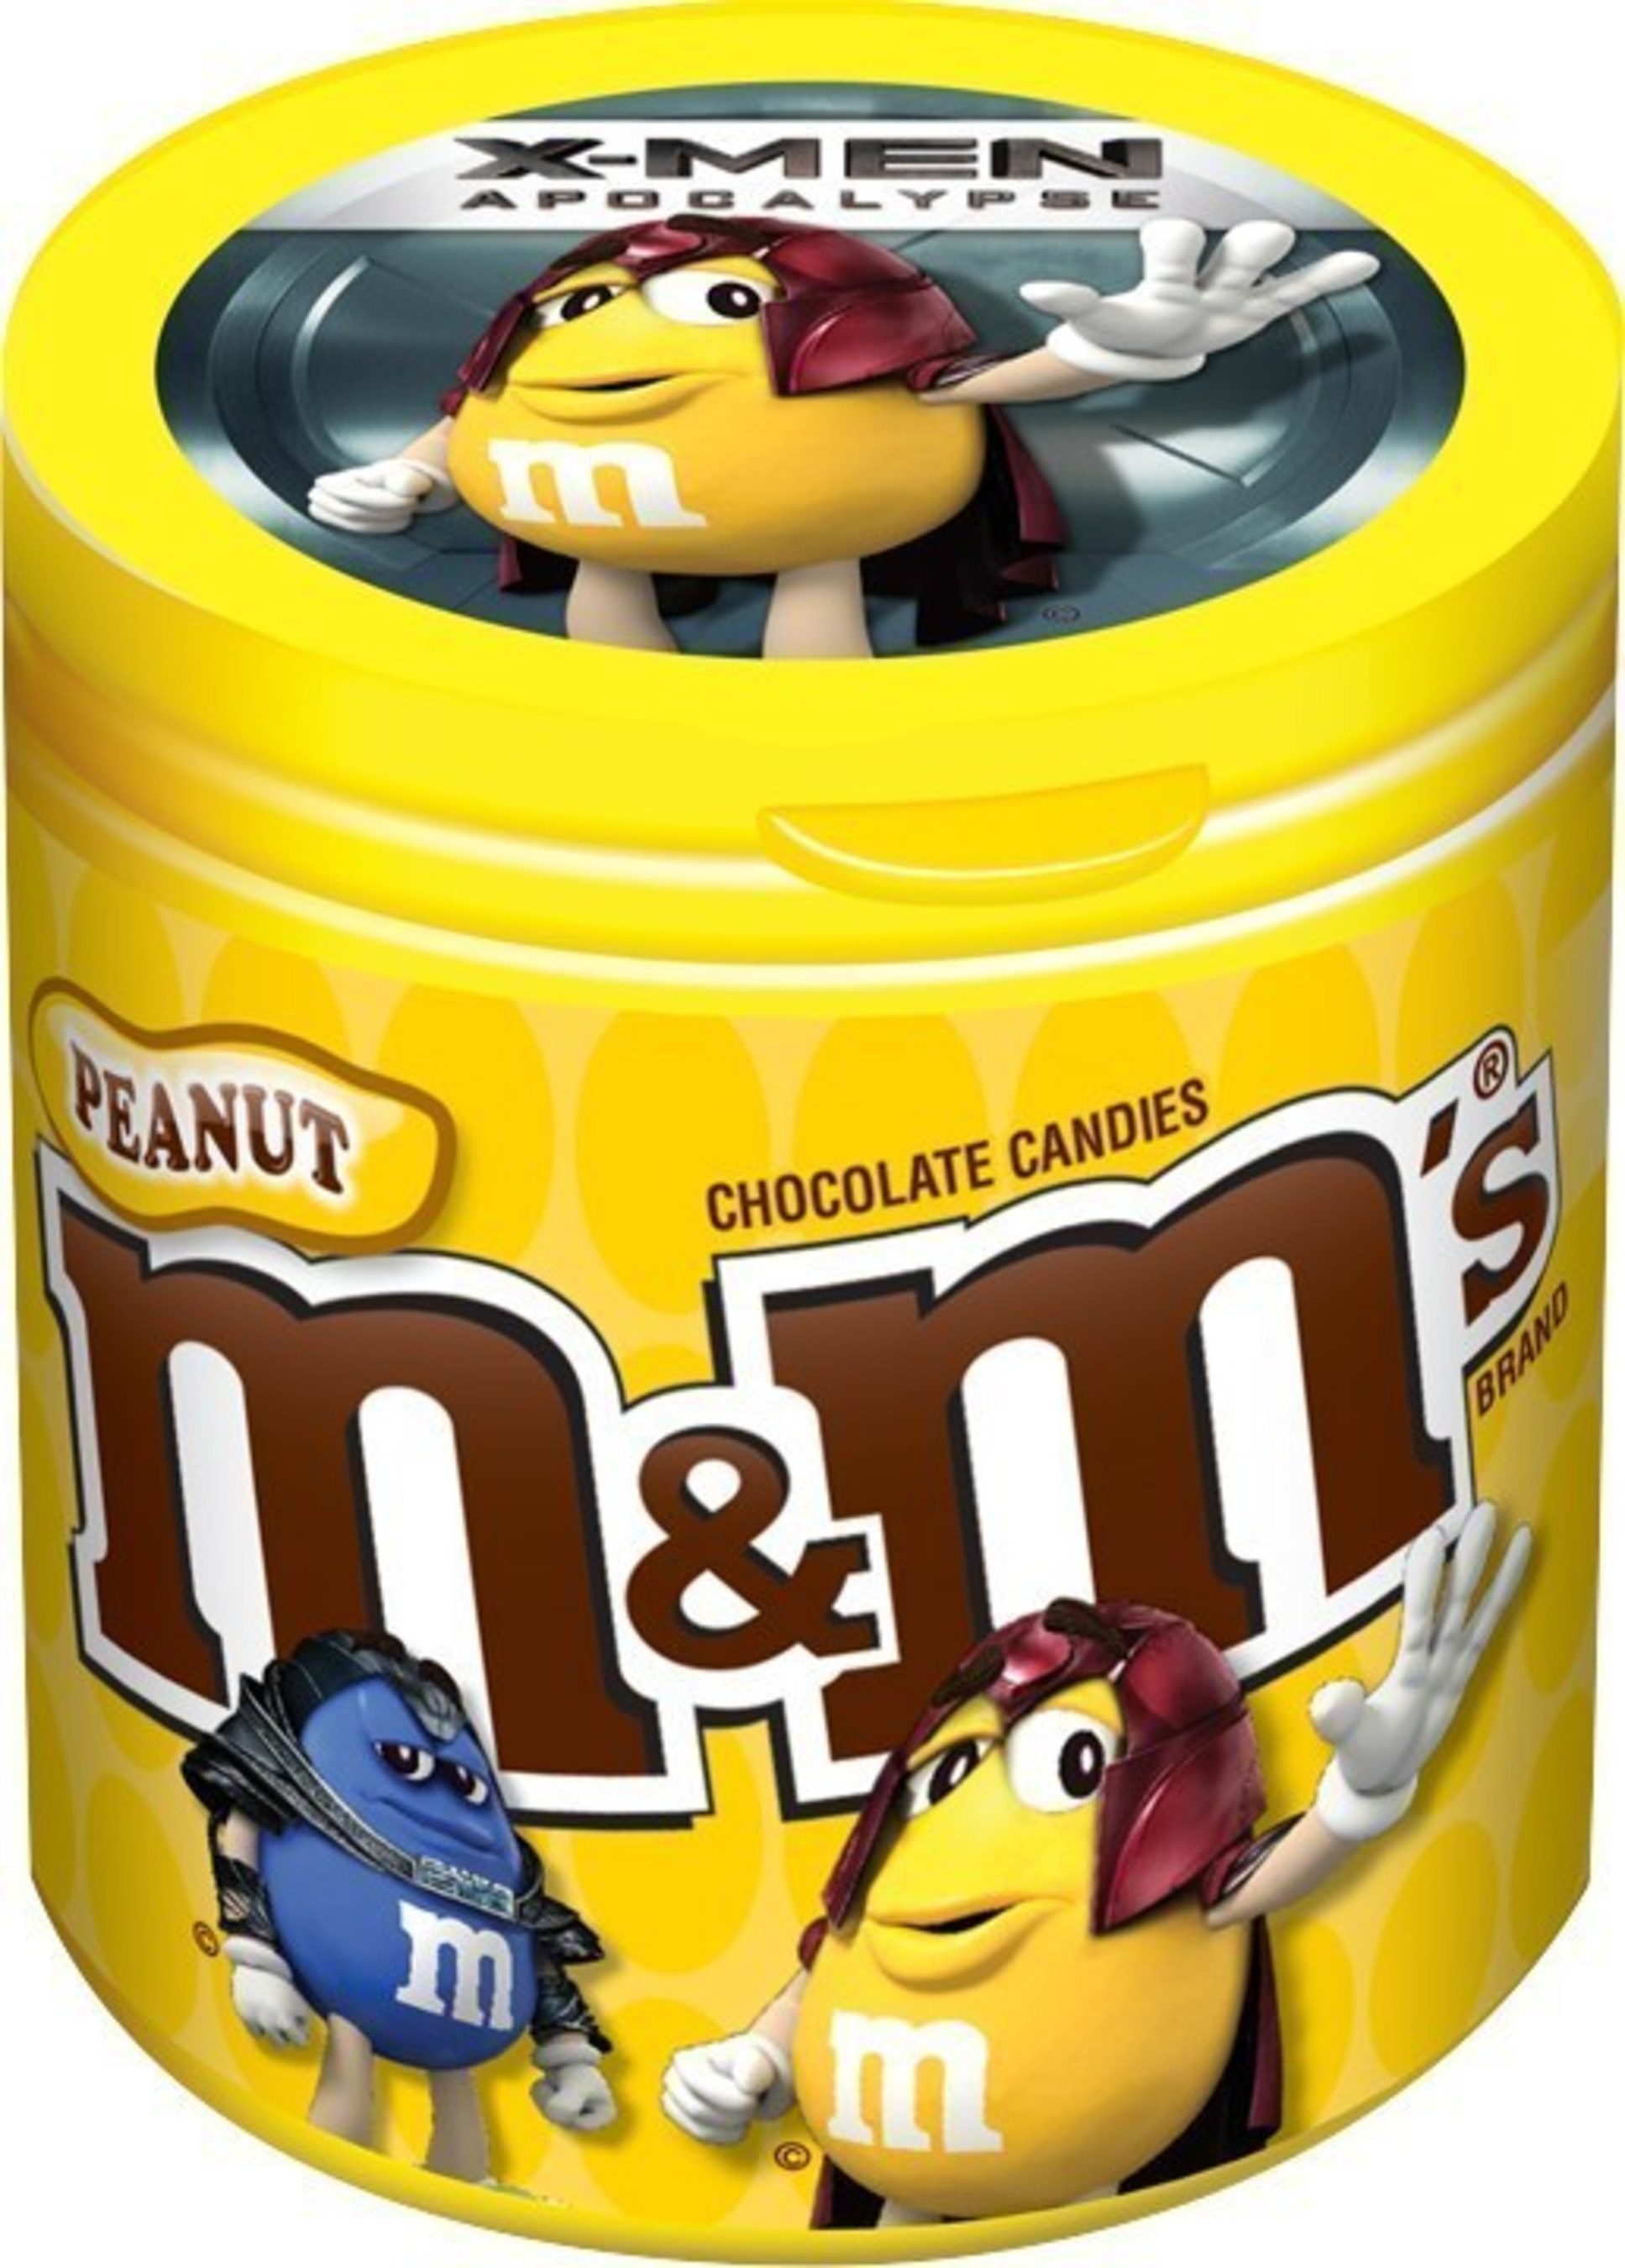 M&M'S is introducing X-Men-themed merchandise bottles featuring eight X-Men M&M'S character images. The new bottles will be available in early May at Walmart, Kroger, CVS and movie cinemas across the United States.